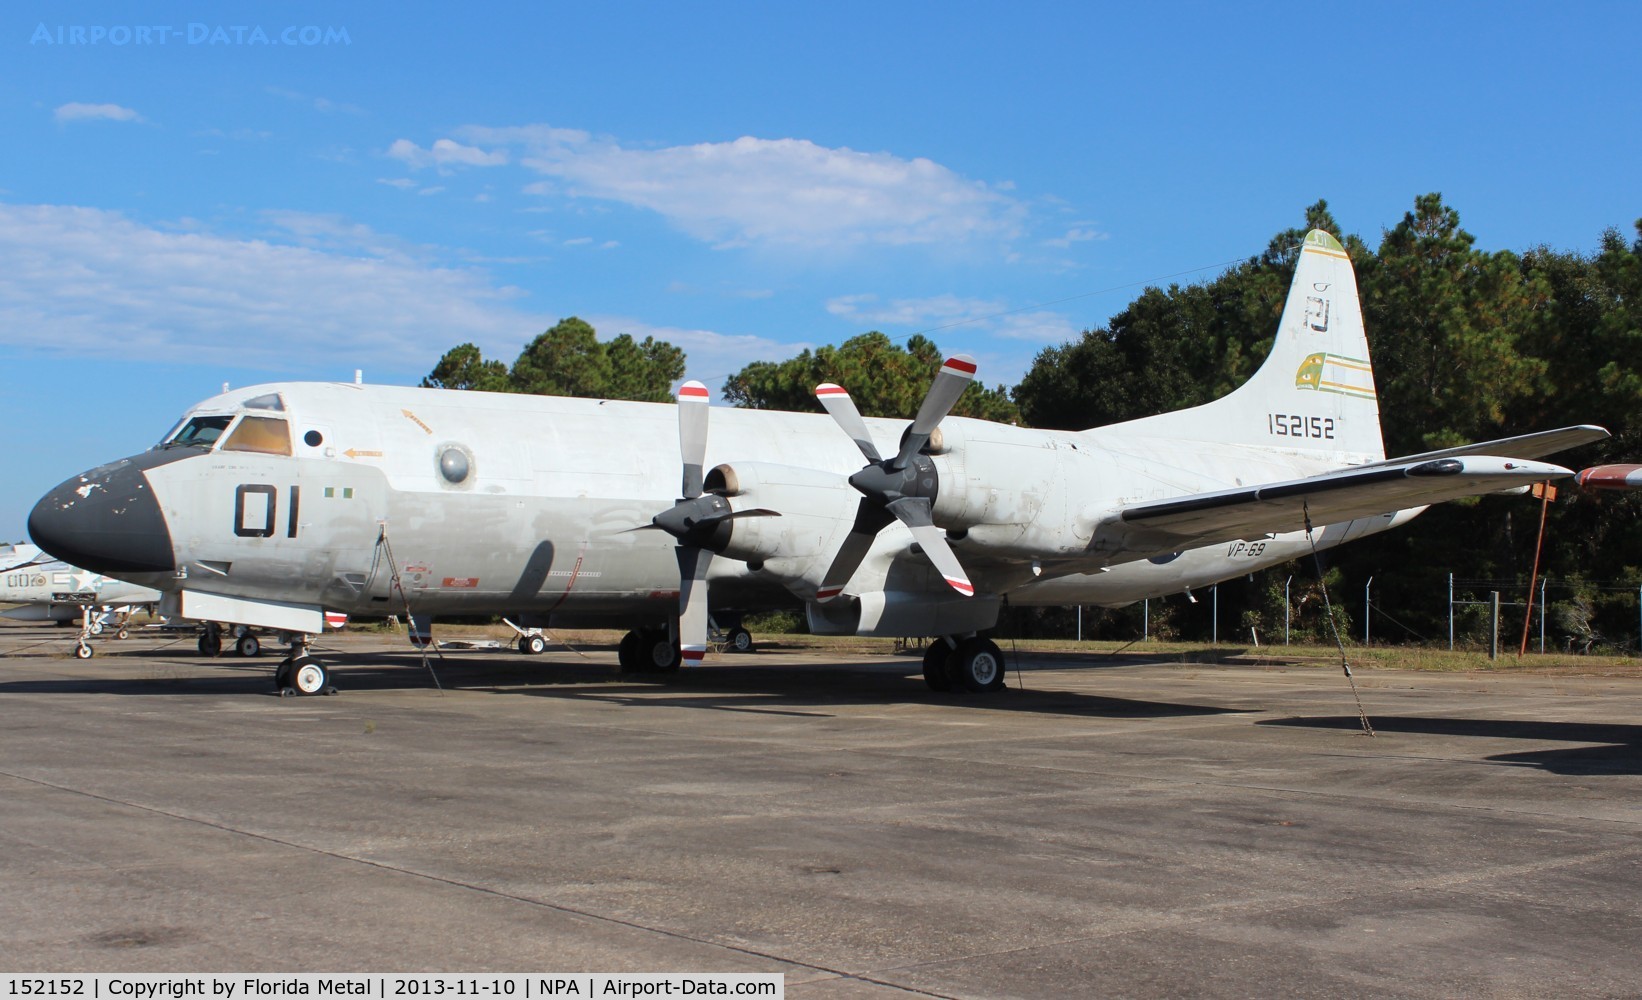 152152, Lockheed P-3A-50-LO Orion C/N 185-5122, P-3A Orion